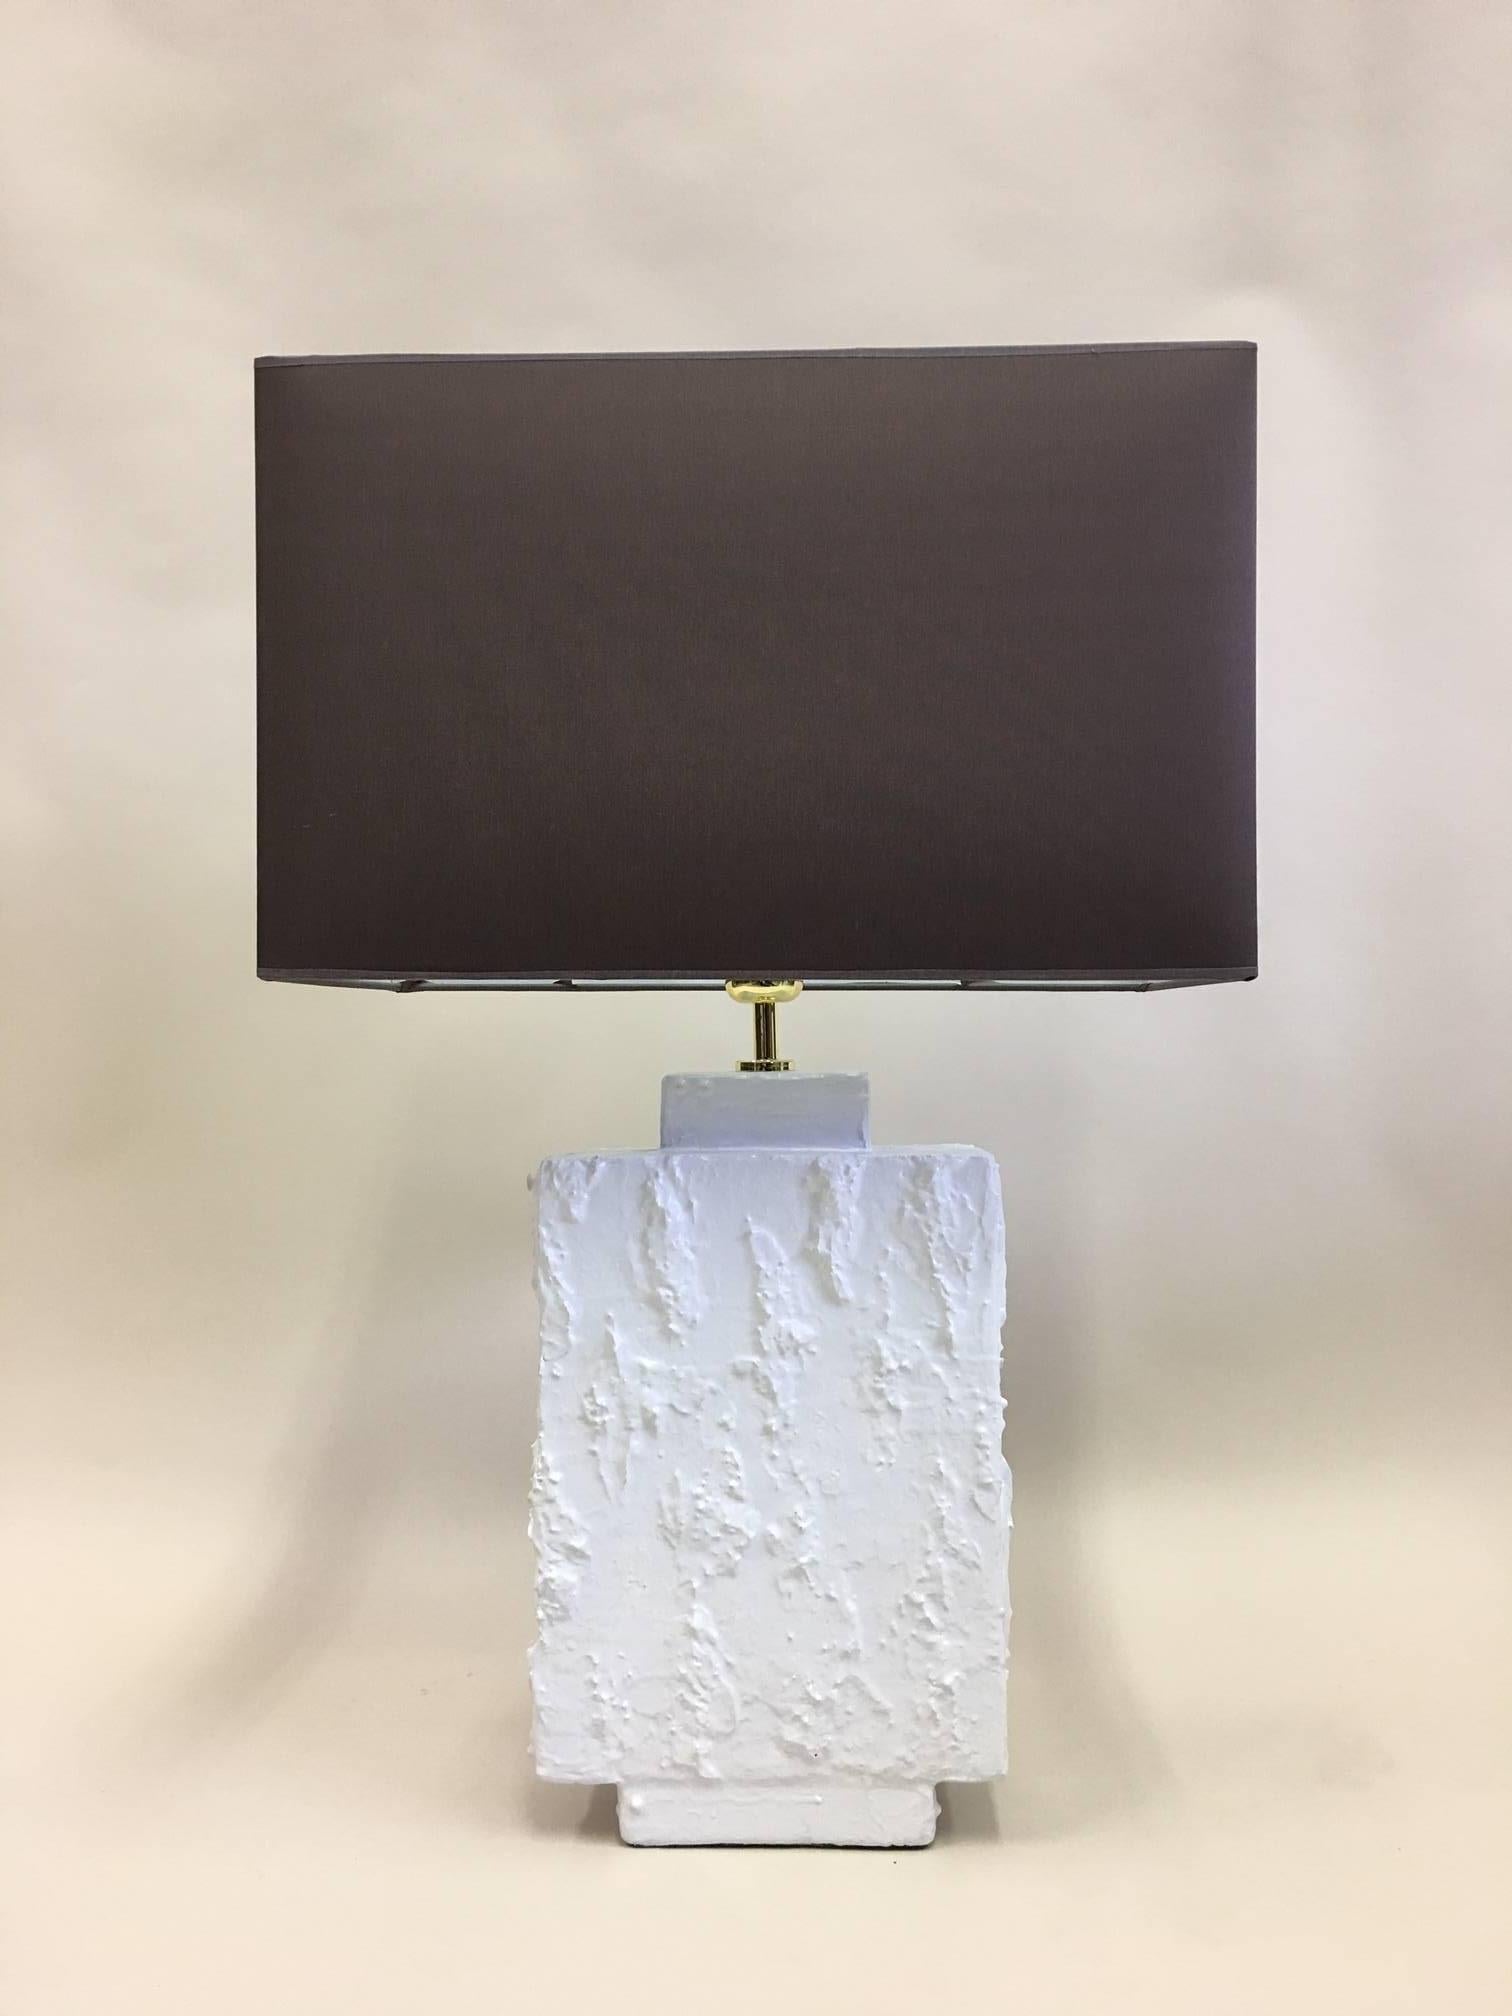 Elegant pair of French Mid-Century Modern plaster table lamps in the spirit of Alberto and Diego Giacometti. The pieces utilize rectangular geometric or architectural forms in contrast with a highly textured white plaster relief that create subtle